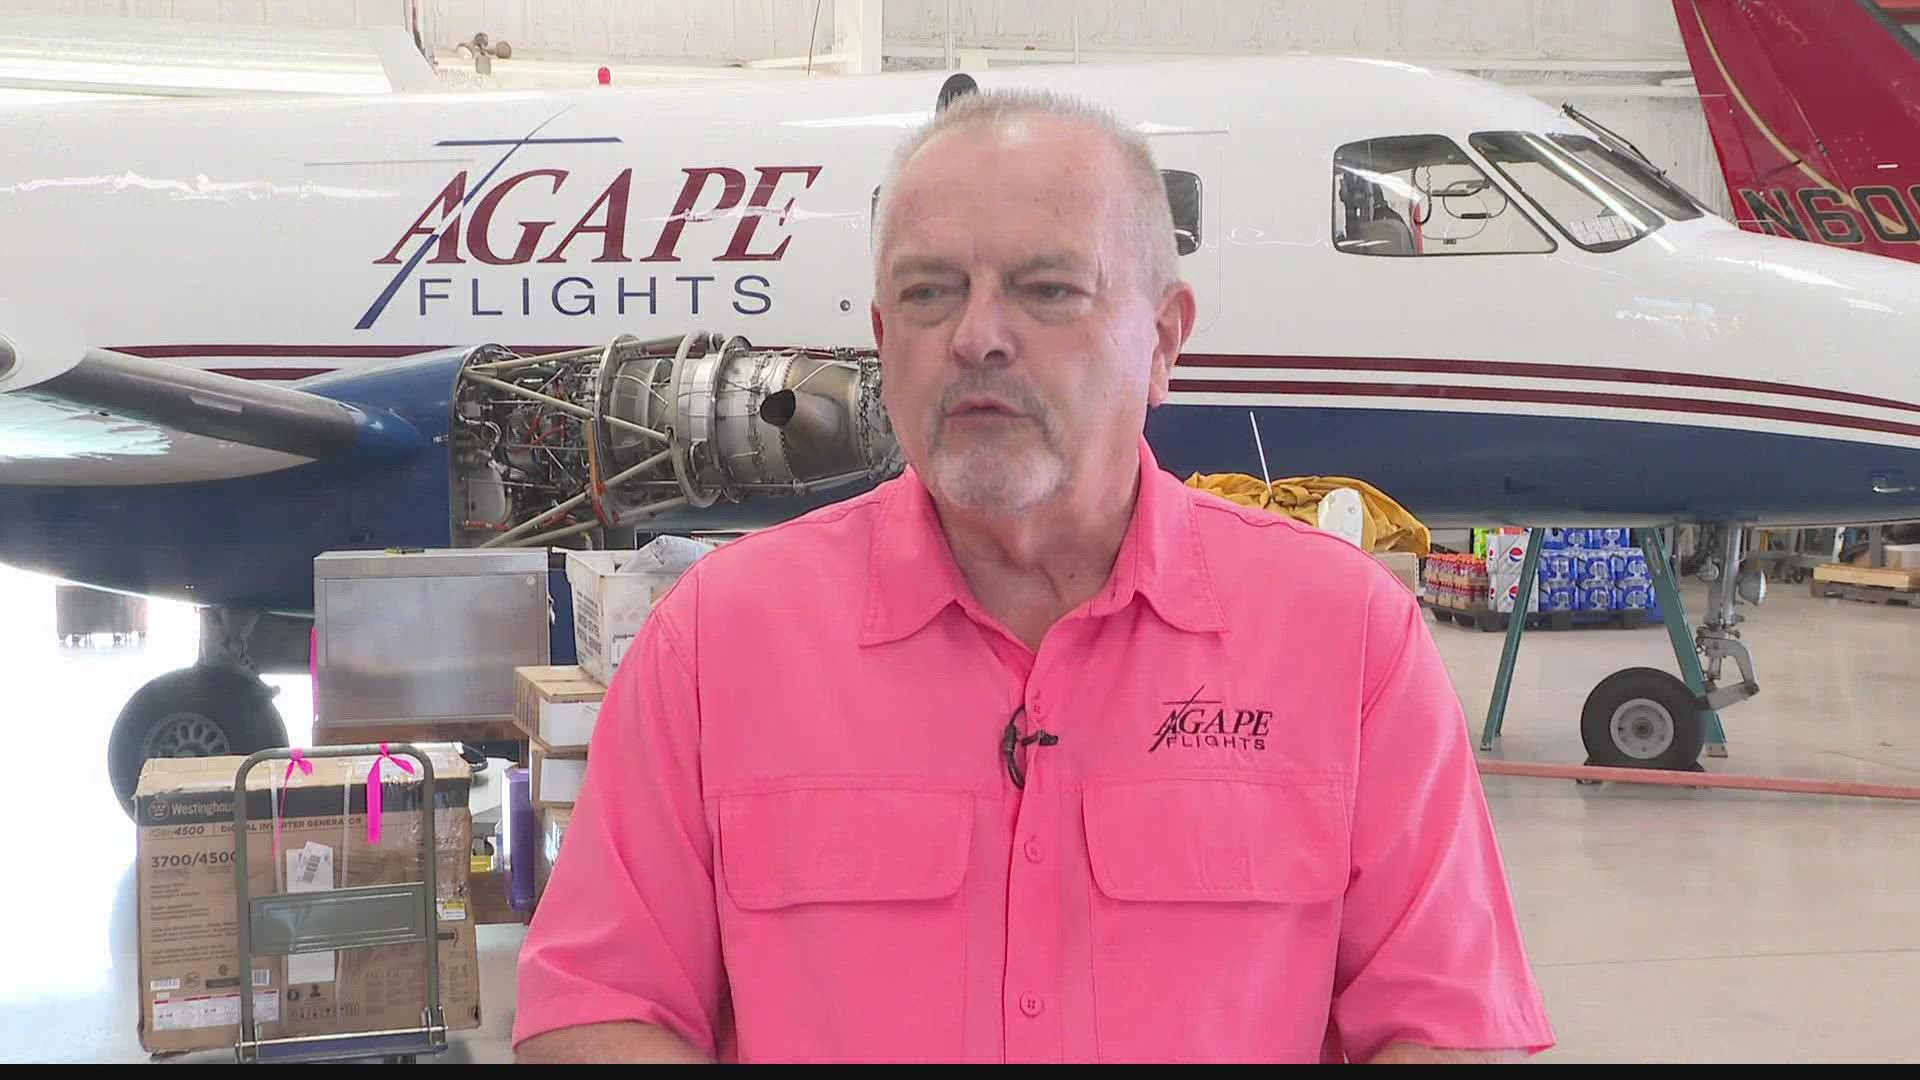 CEO of Agape Flights, which does charity charter flights to Haiti, says he is concerned for their safety as kidnappers demand $17 million in ransom.